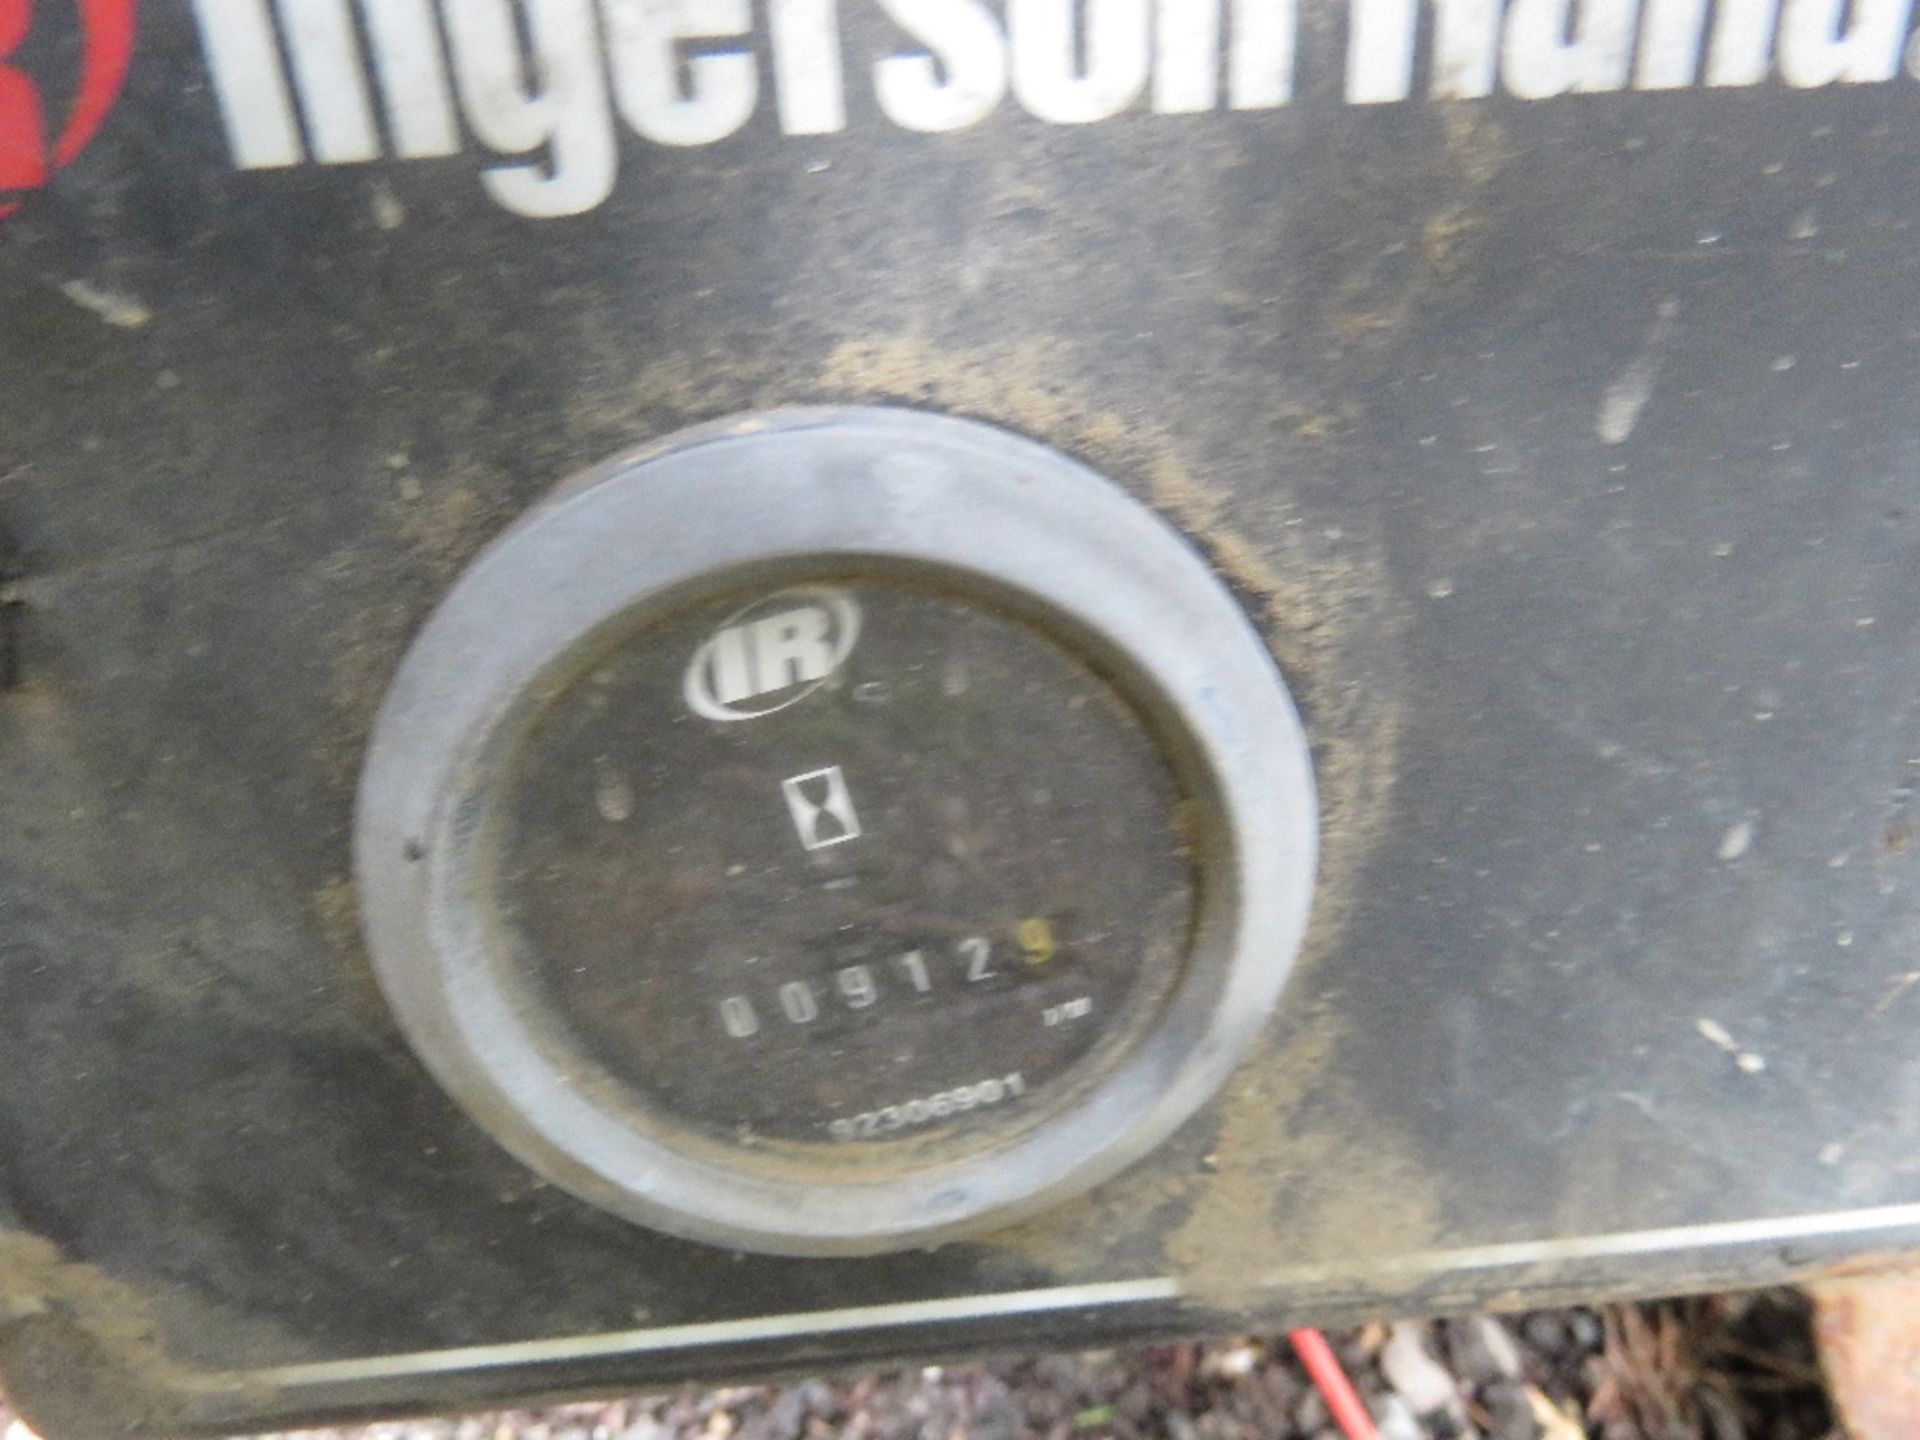 INGERSOLL RAND 720 TOWED ROAD COMPRESSOR. KUBOTA ENGINE. BEEN IN LONG TERM STORAGE, UNTESTED, CONDIT - Image 7 of 10